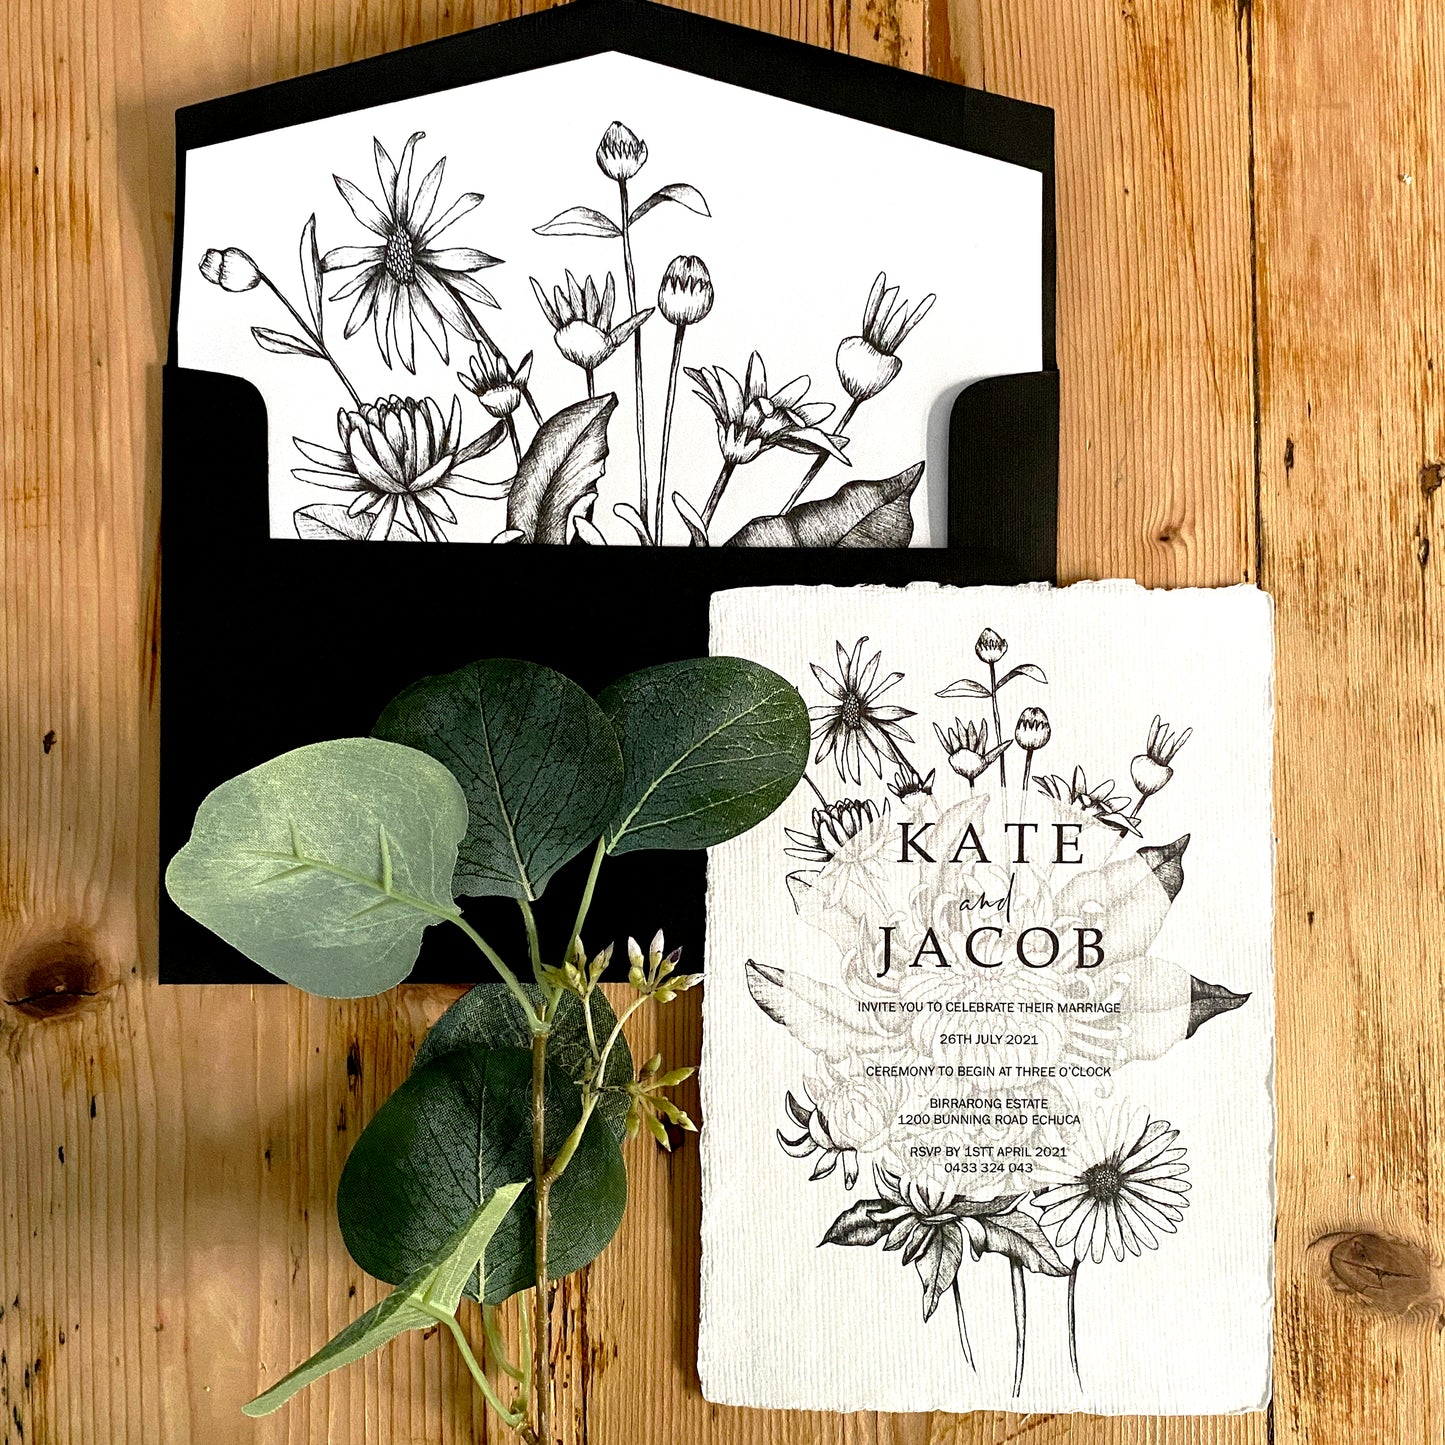 Chrysanthemum wedding invite design, featuring whimsical botanical artwork, here showing the invite and envelope with the liner